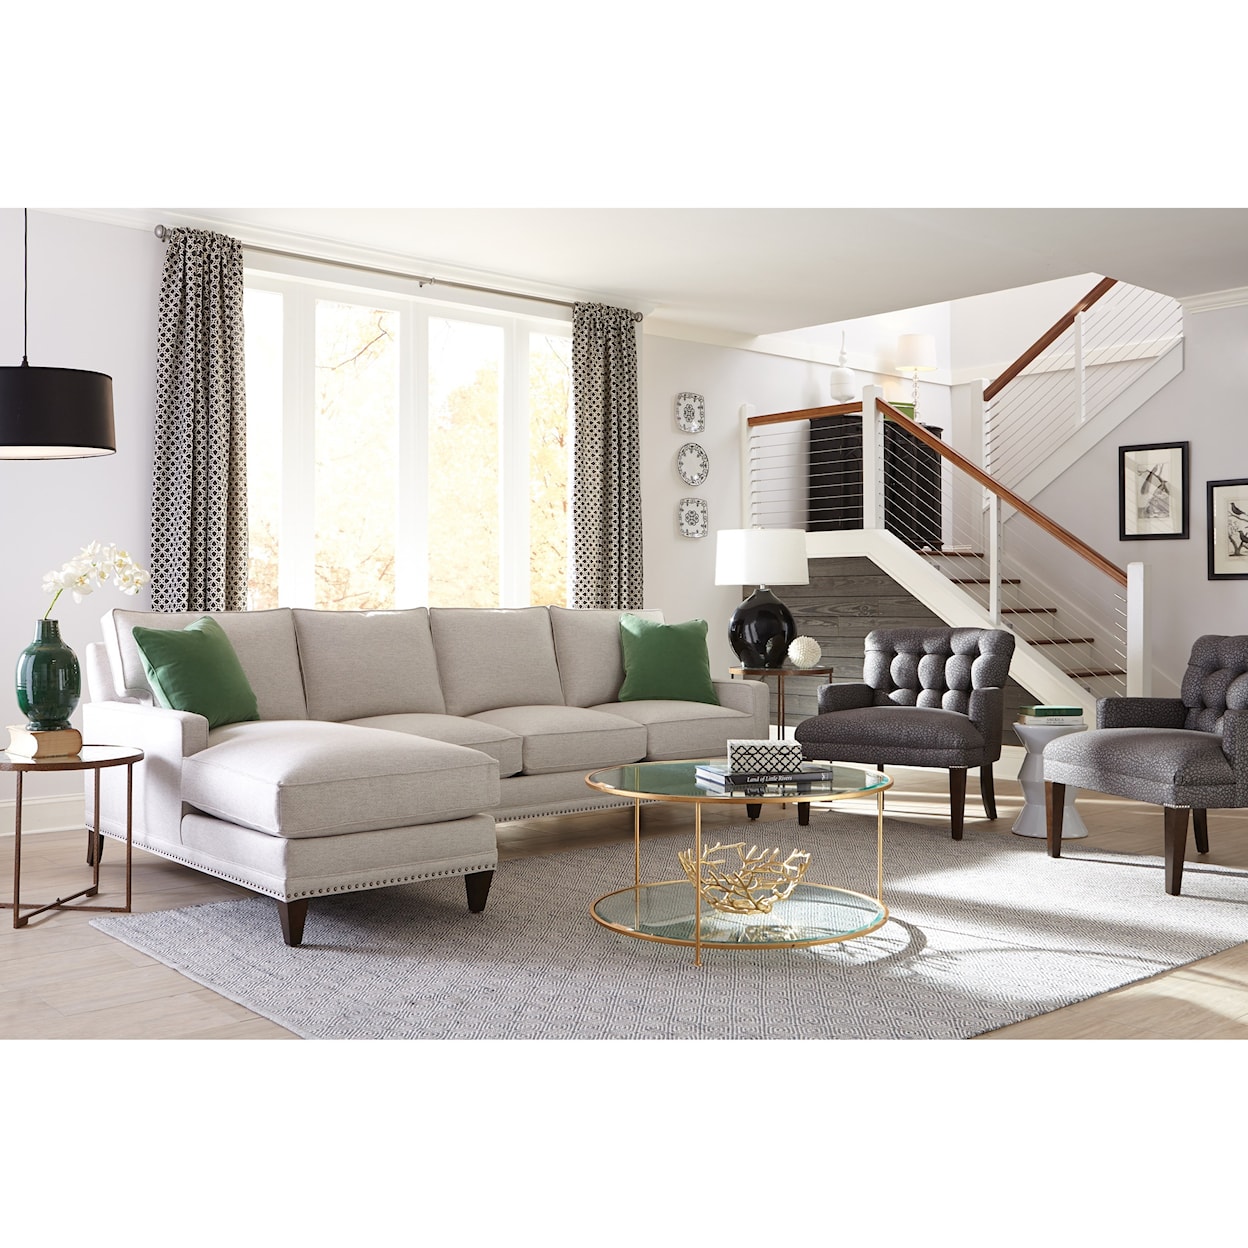 Rowe My Style II Customizable Sofa with Left Seated Chaise